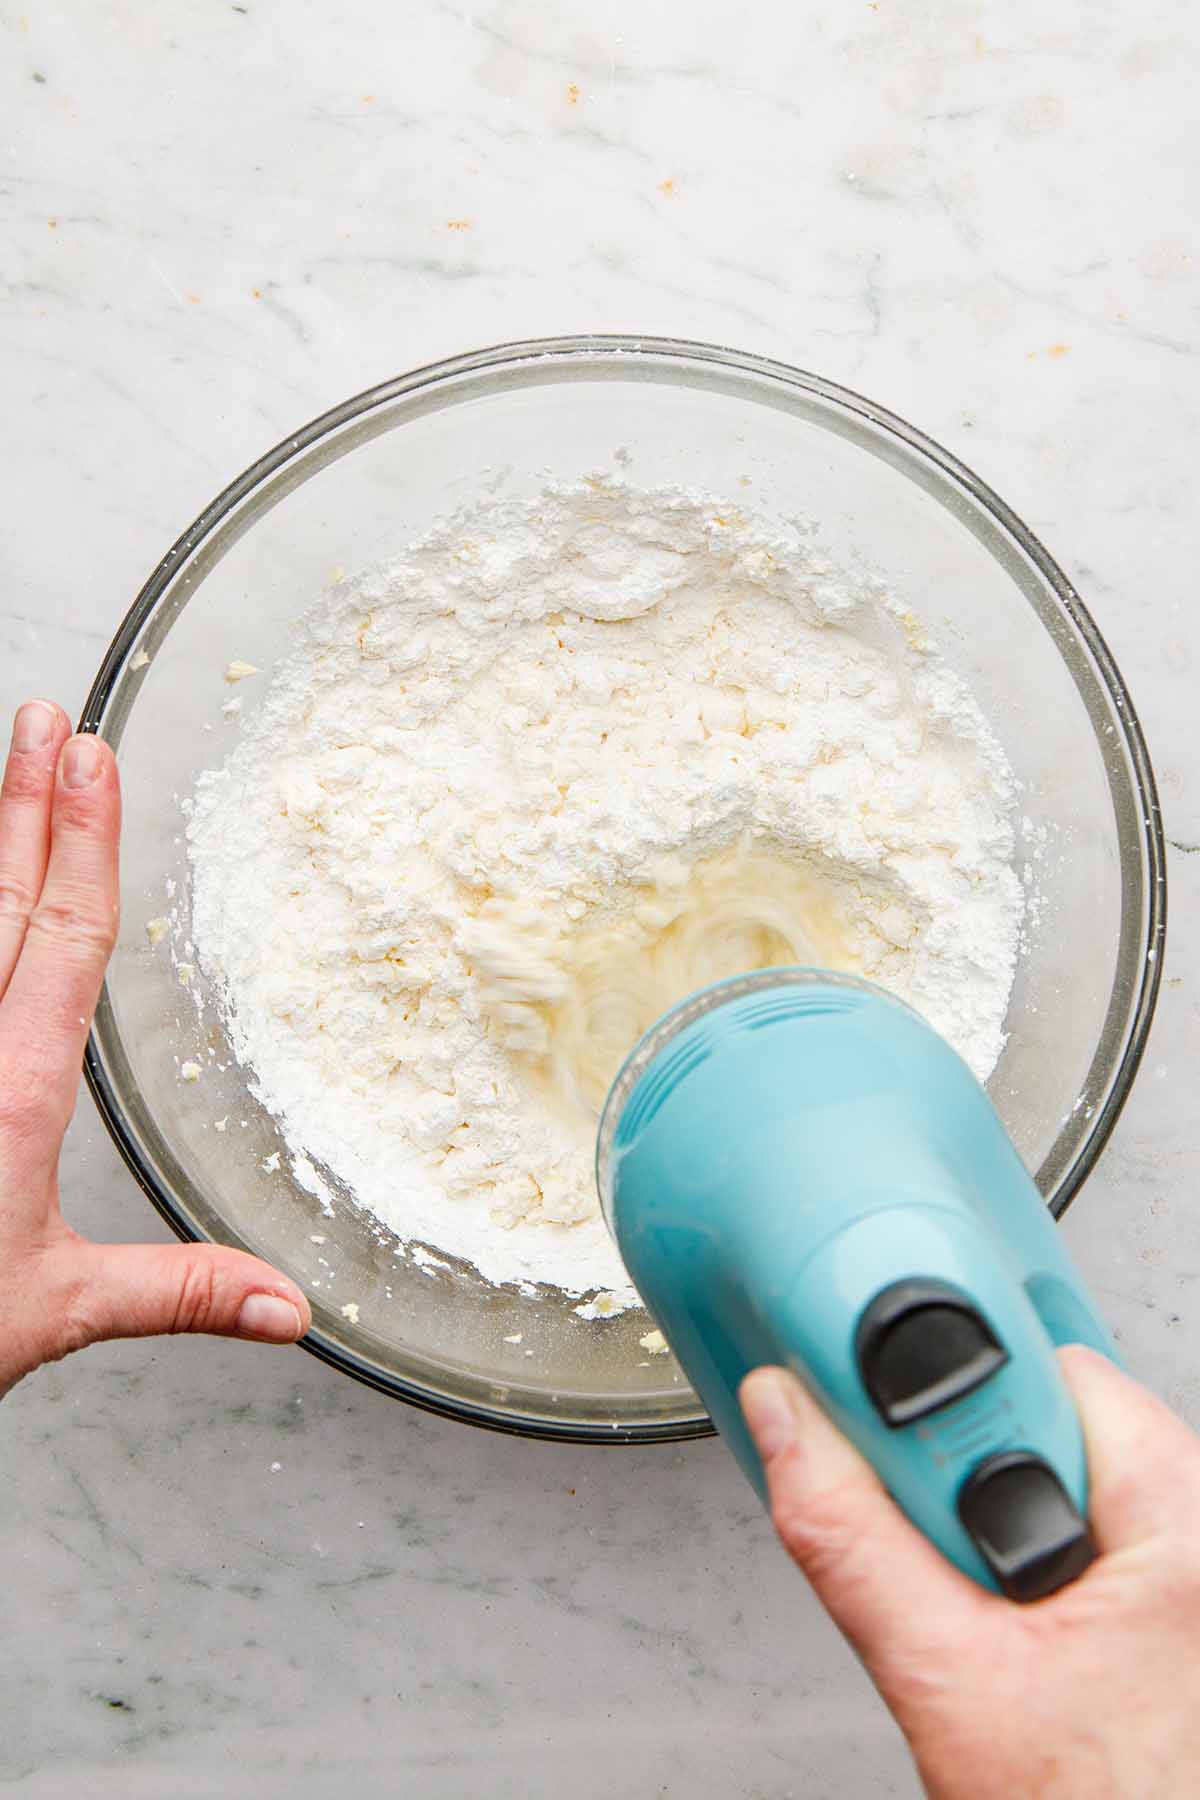 A hand using a hand mixer to mix powdered sugar into creamed butter.